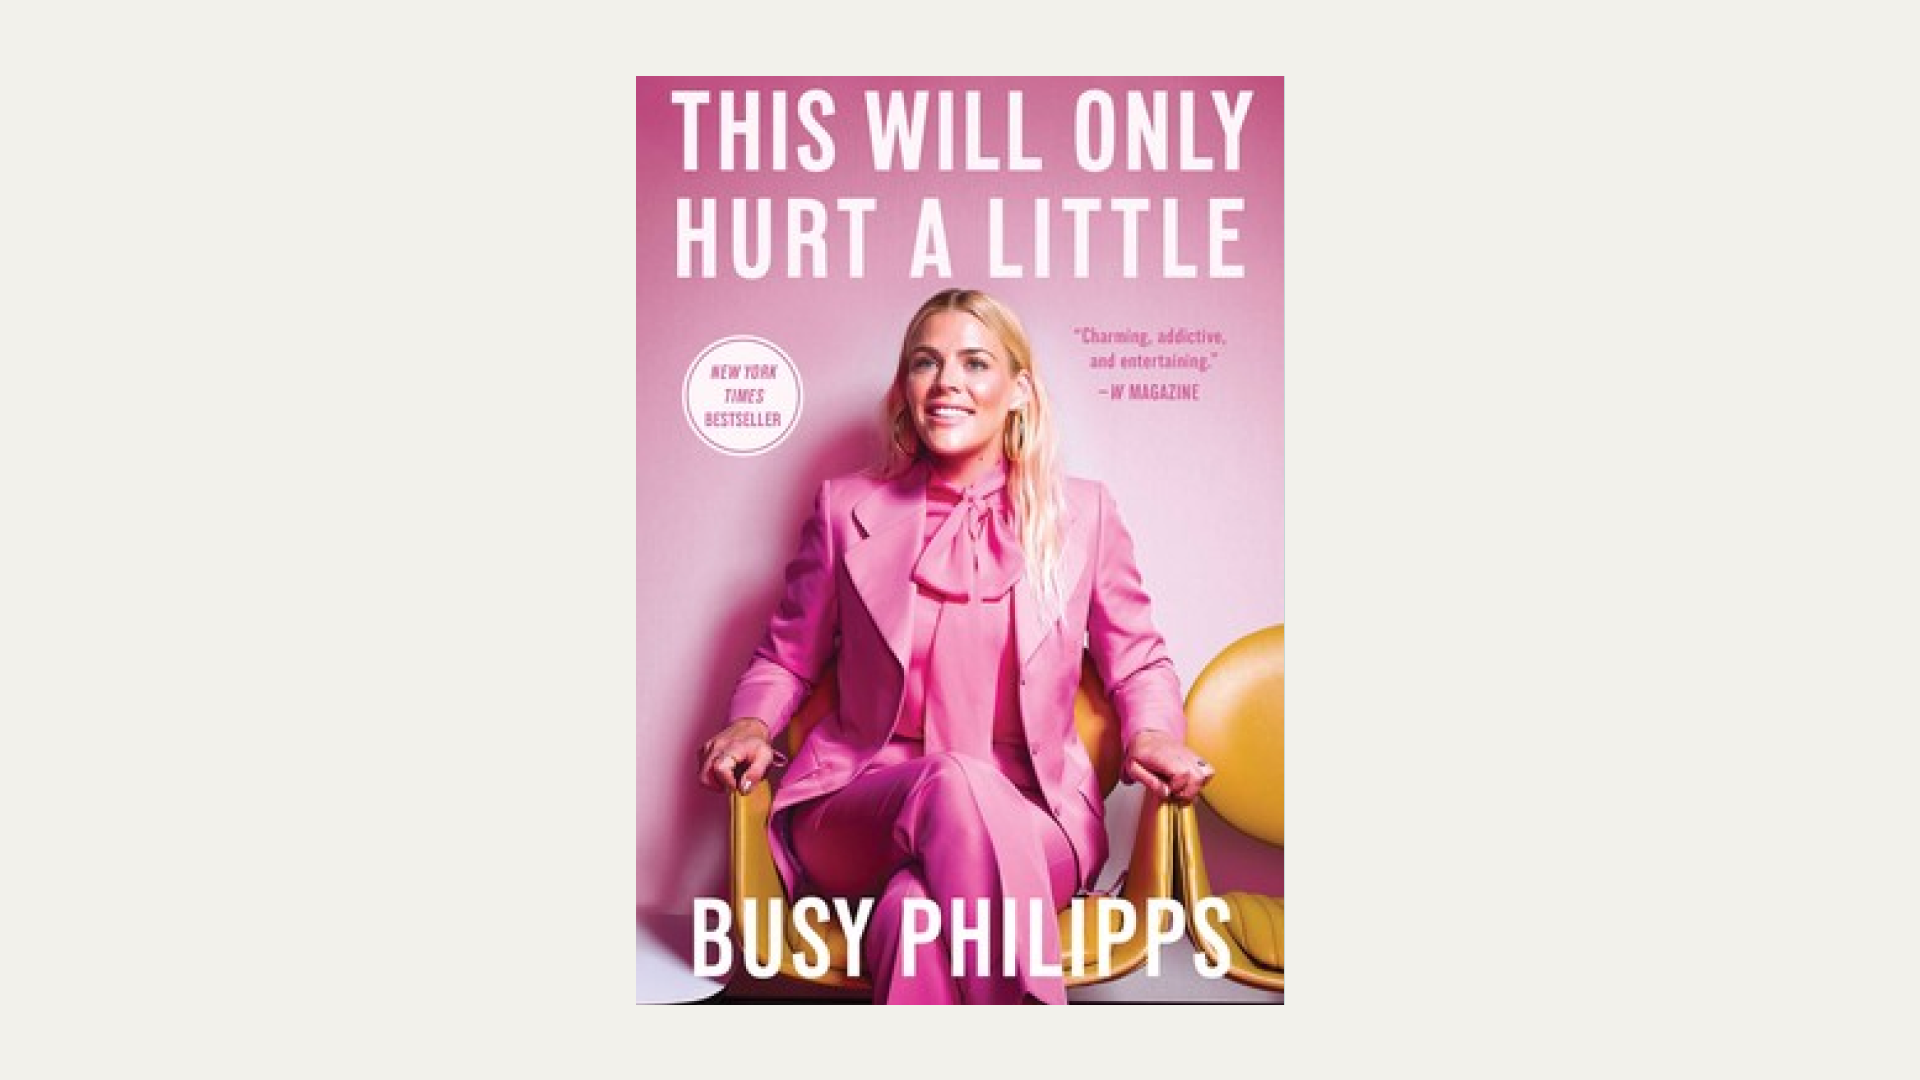 "This Will Only Hurt a Little" by Busy Philipps